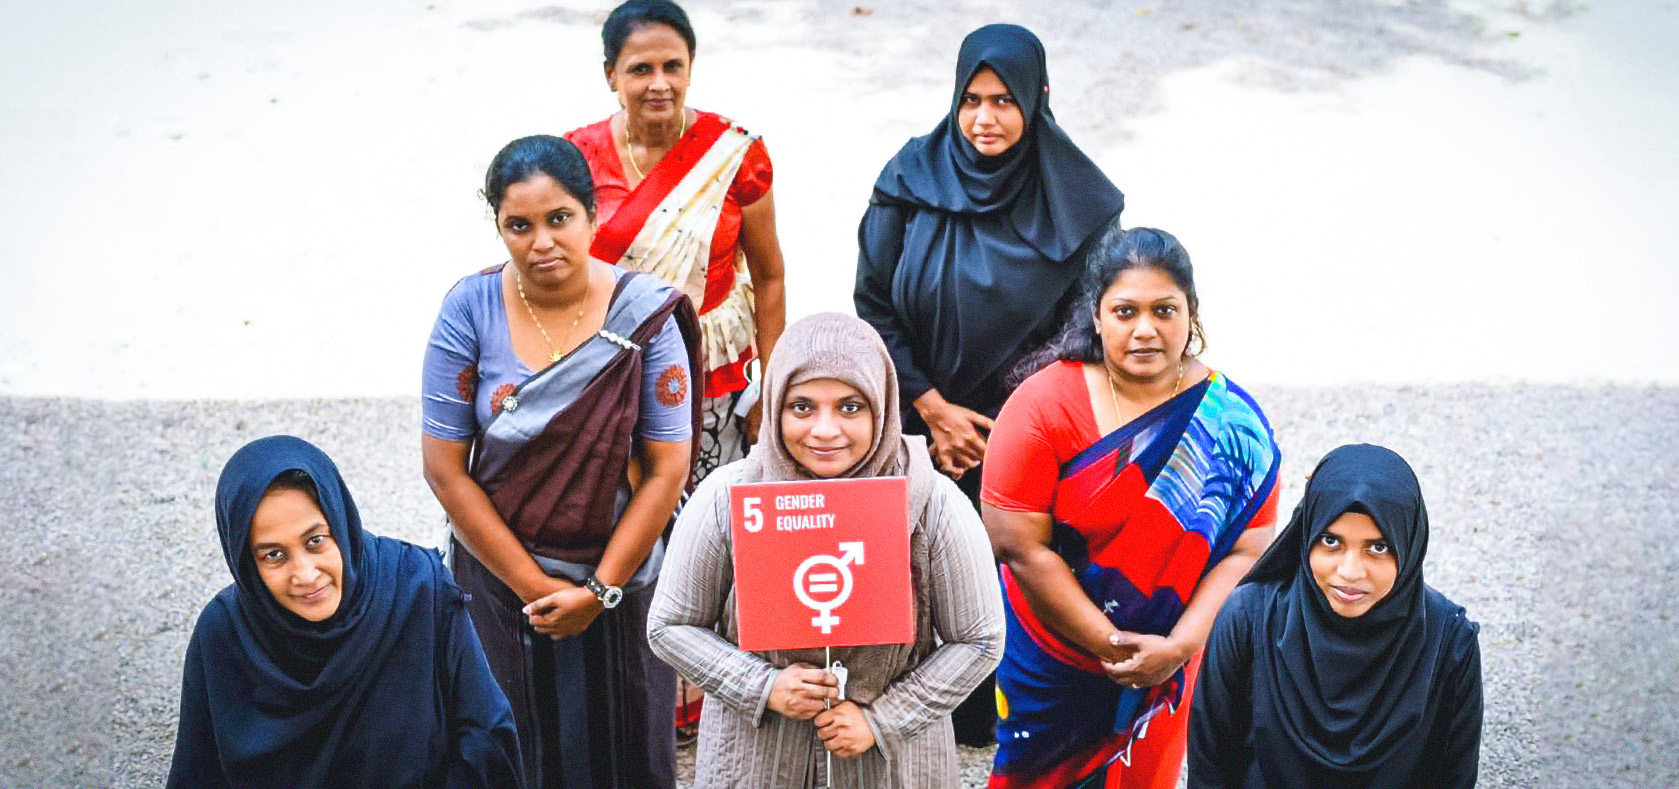 Posing for a group photo are Sri Lankan women community leaders who attended a training that was part of UN Women’s project on promoting women’s leadership in solid waste management. This photo was taken in Puttalam district in April 2021. Photo: UN Women